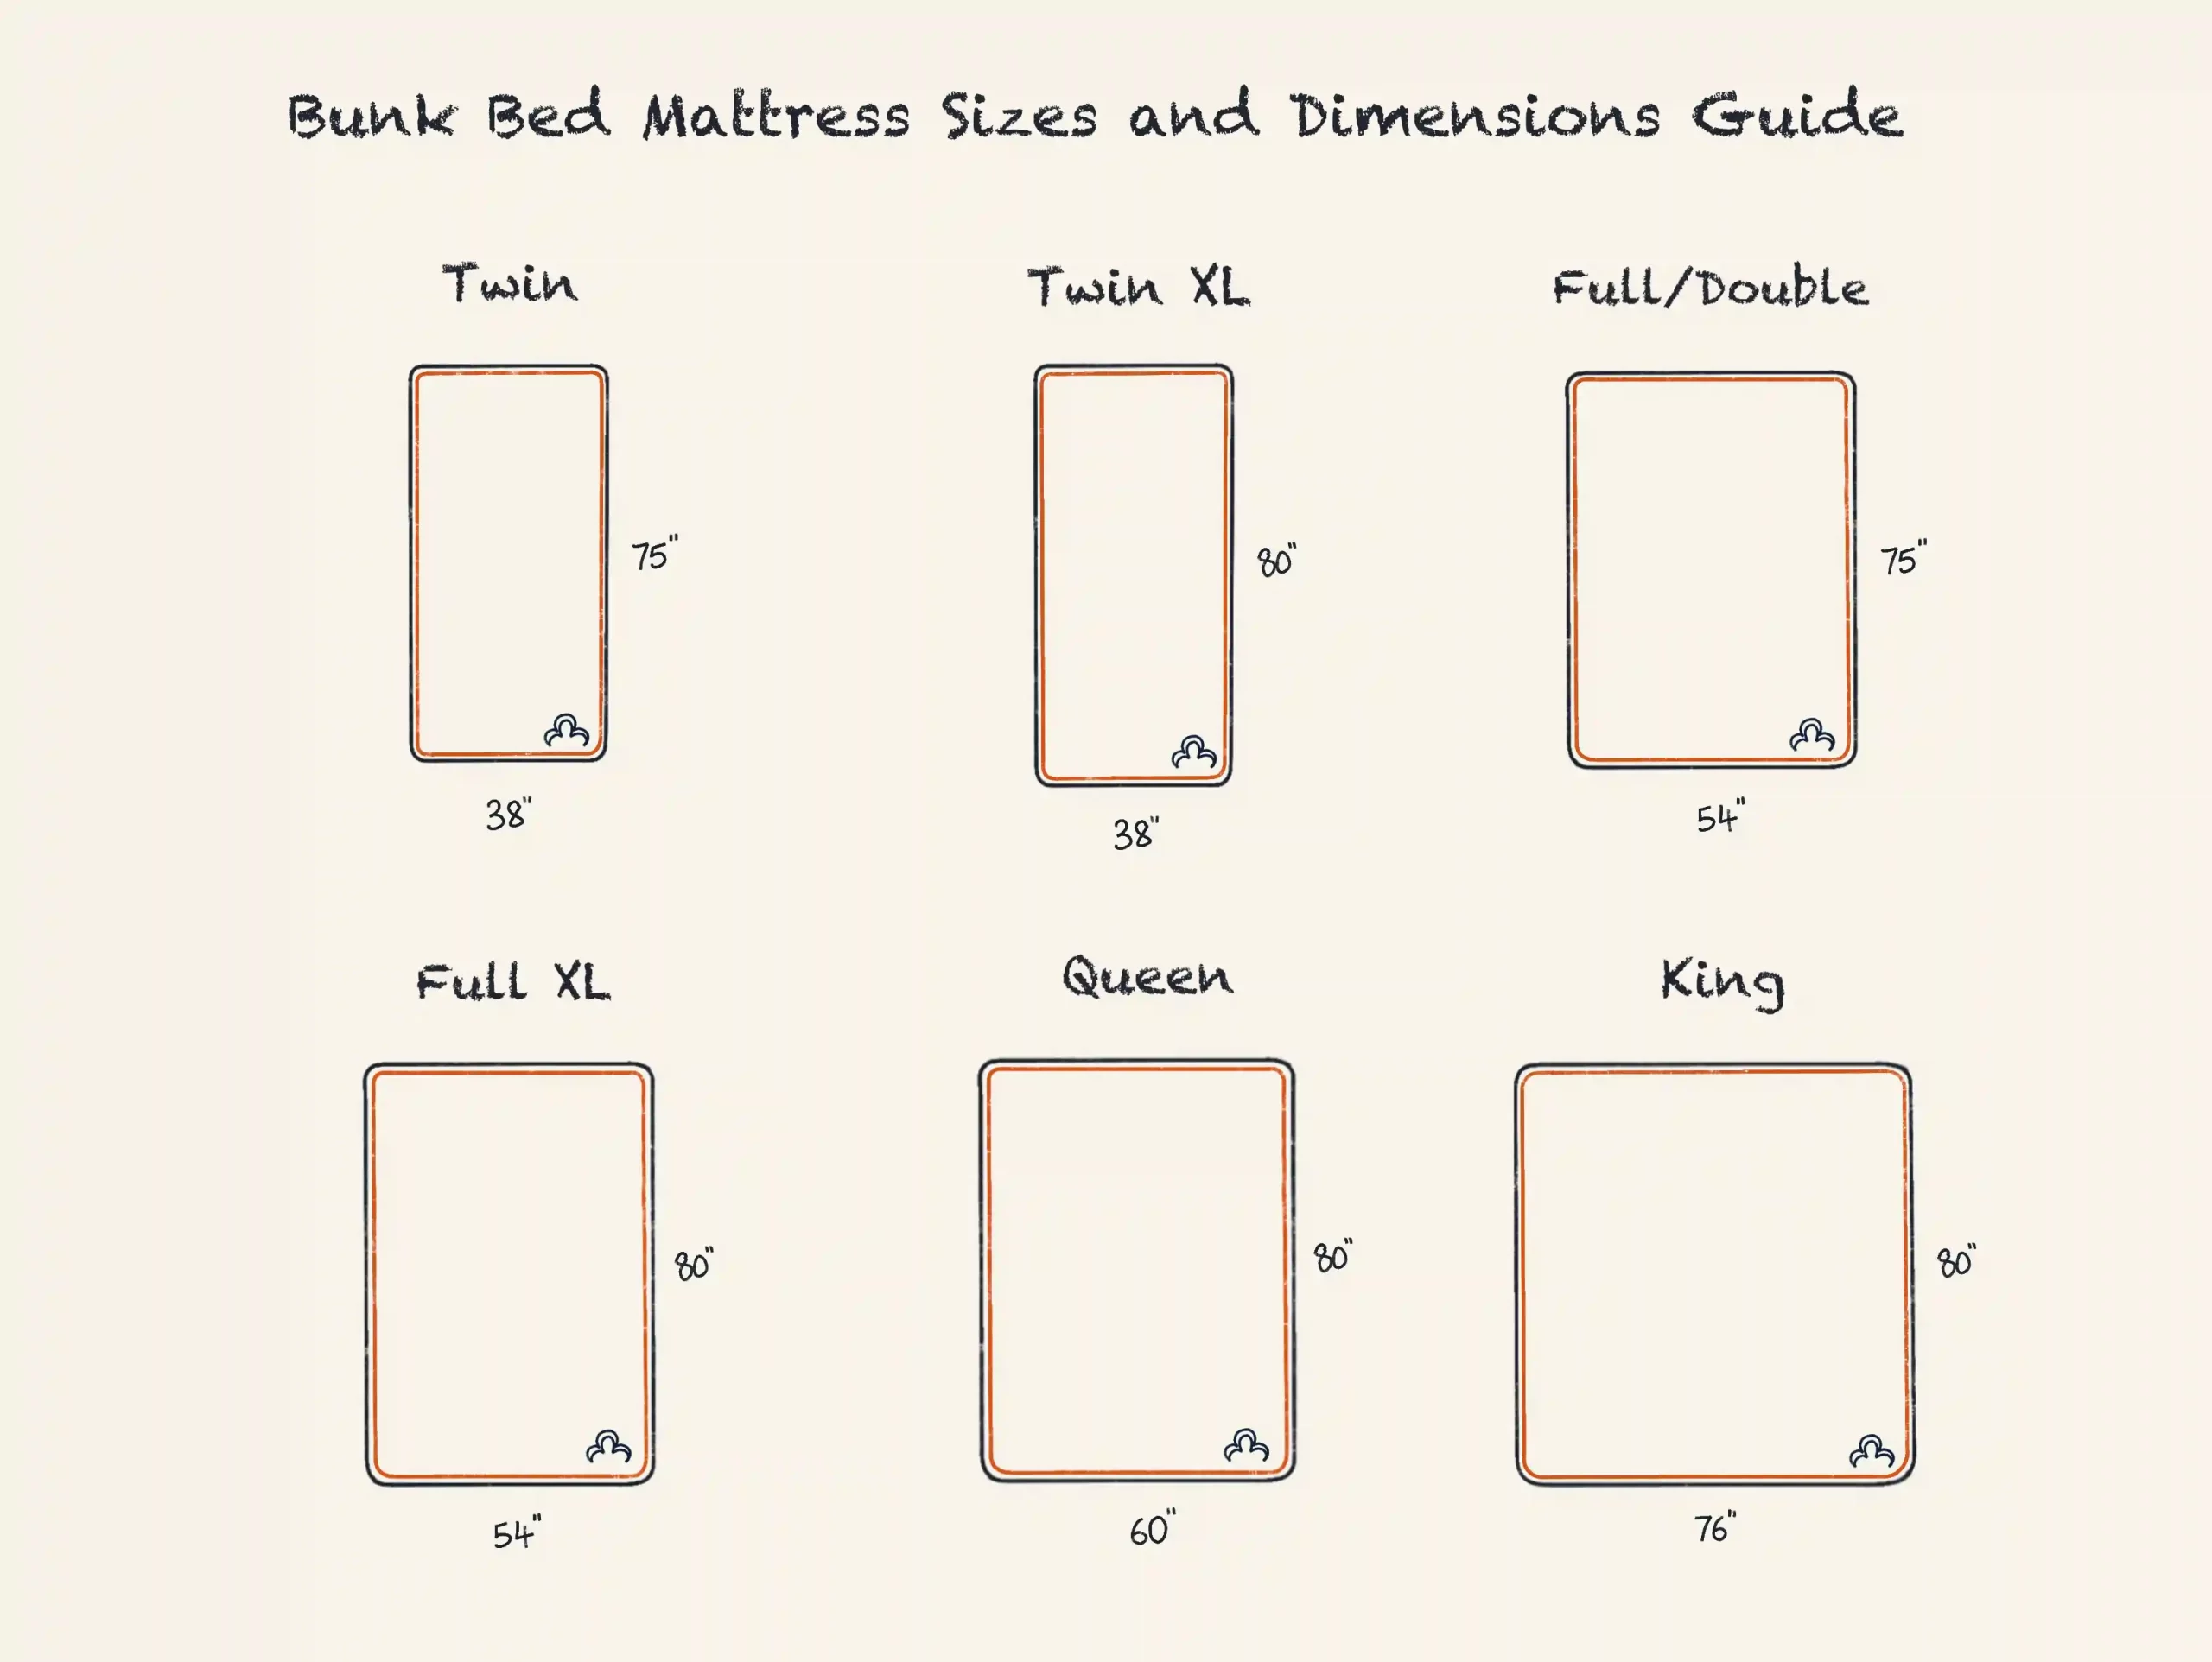 Bunk Bed Mattress Sizes And Dimensions Guide 20   DreamCloud